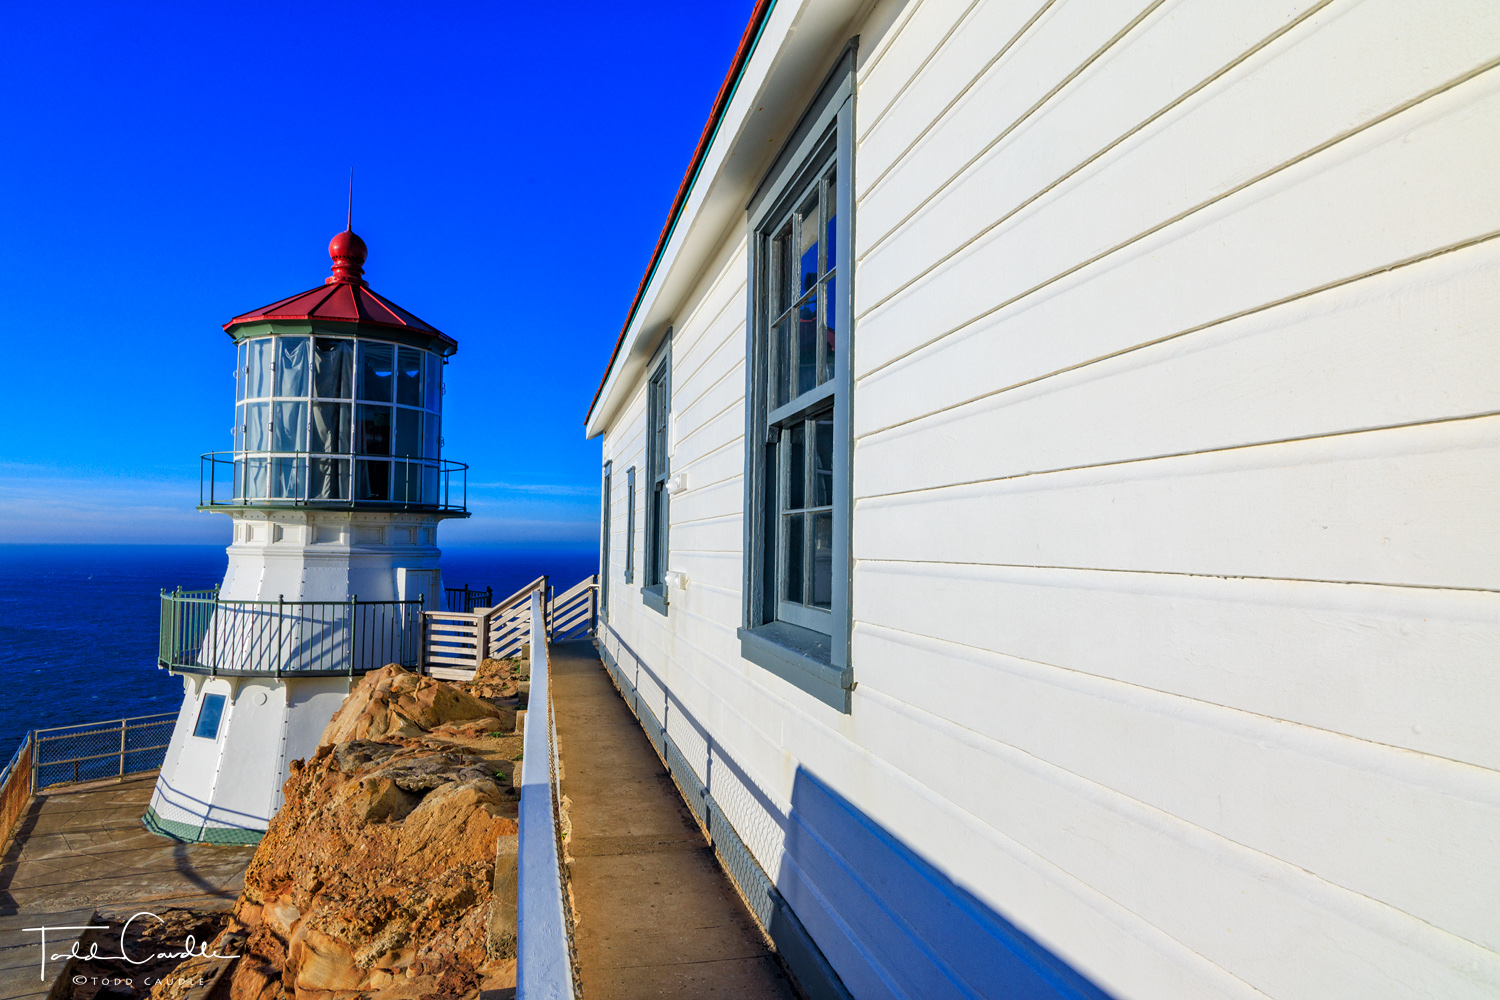 The Point Reyes Lighthouse has been a beacon for sailors since its construction in 1870, standing 265 feet above the Pacific...